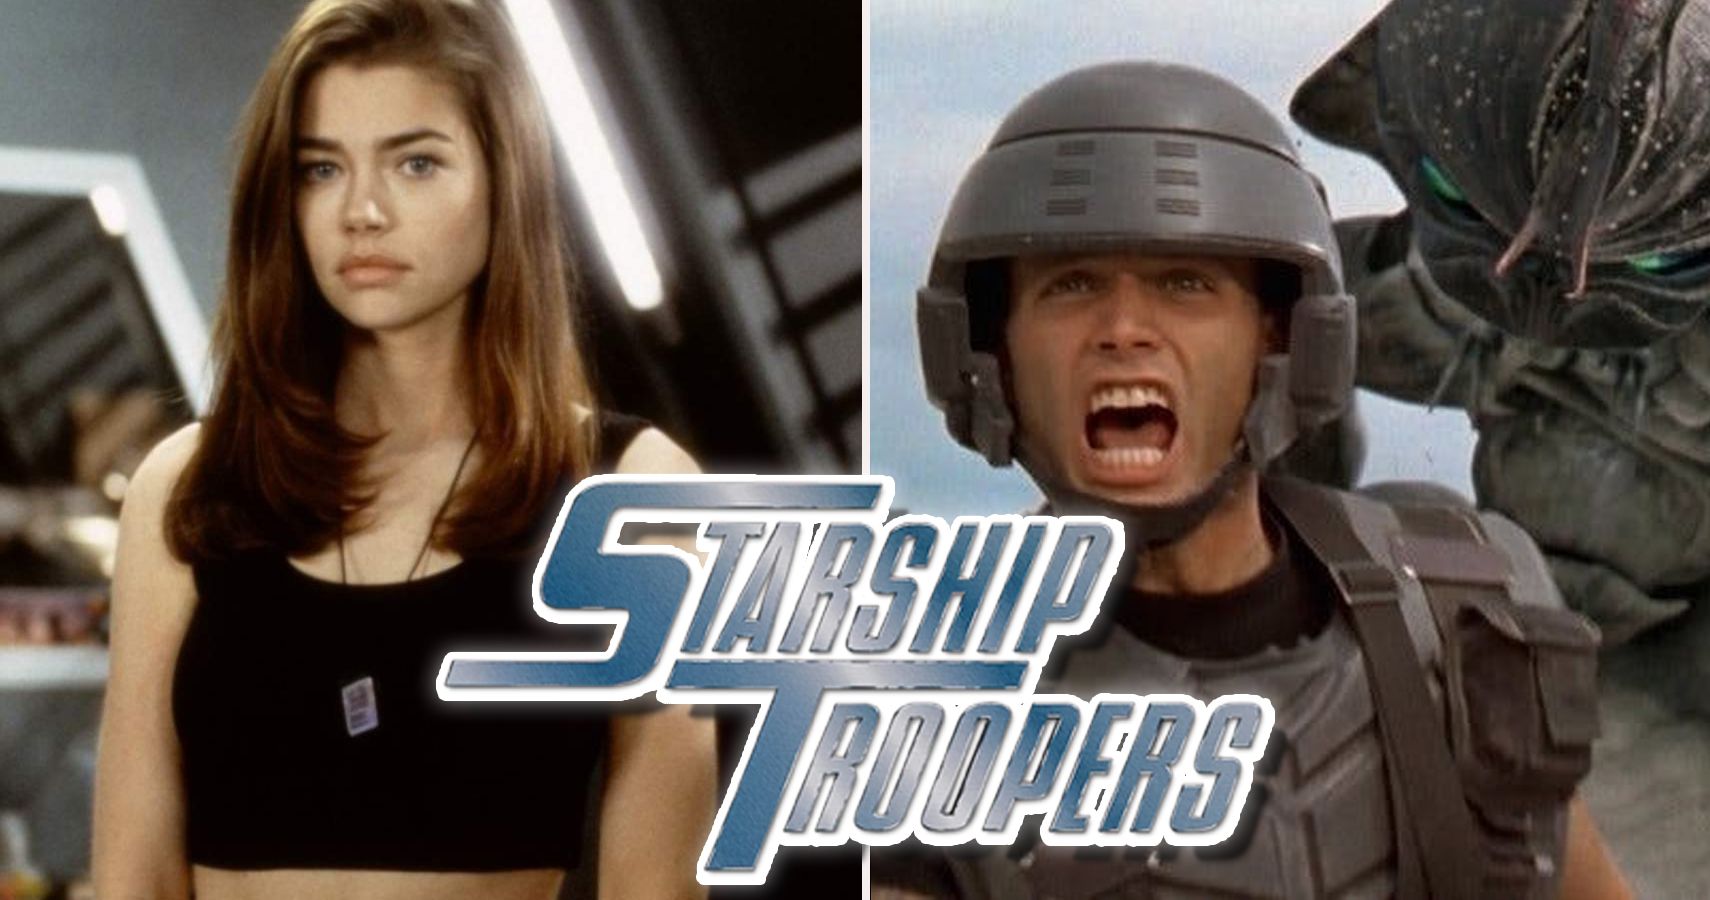 starship troopers 3 cast